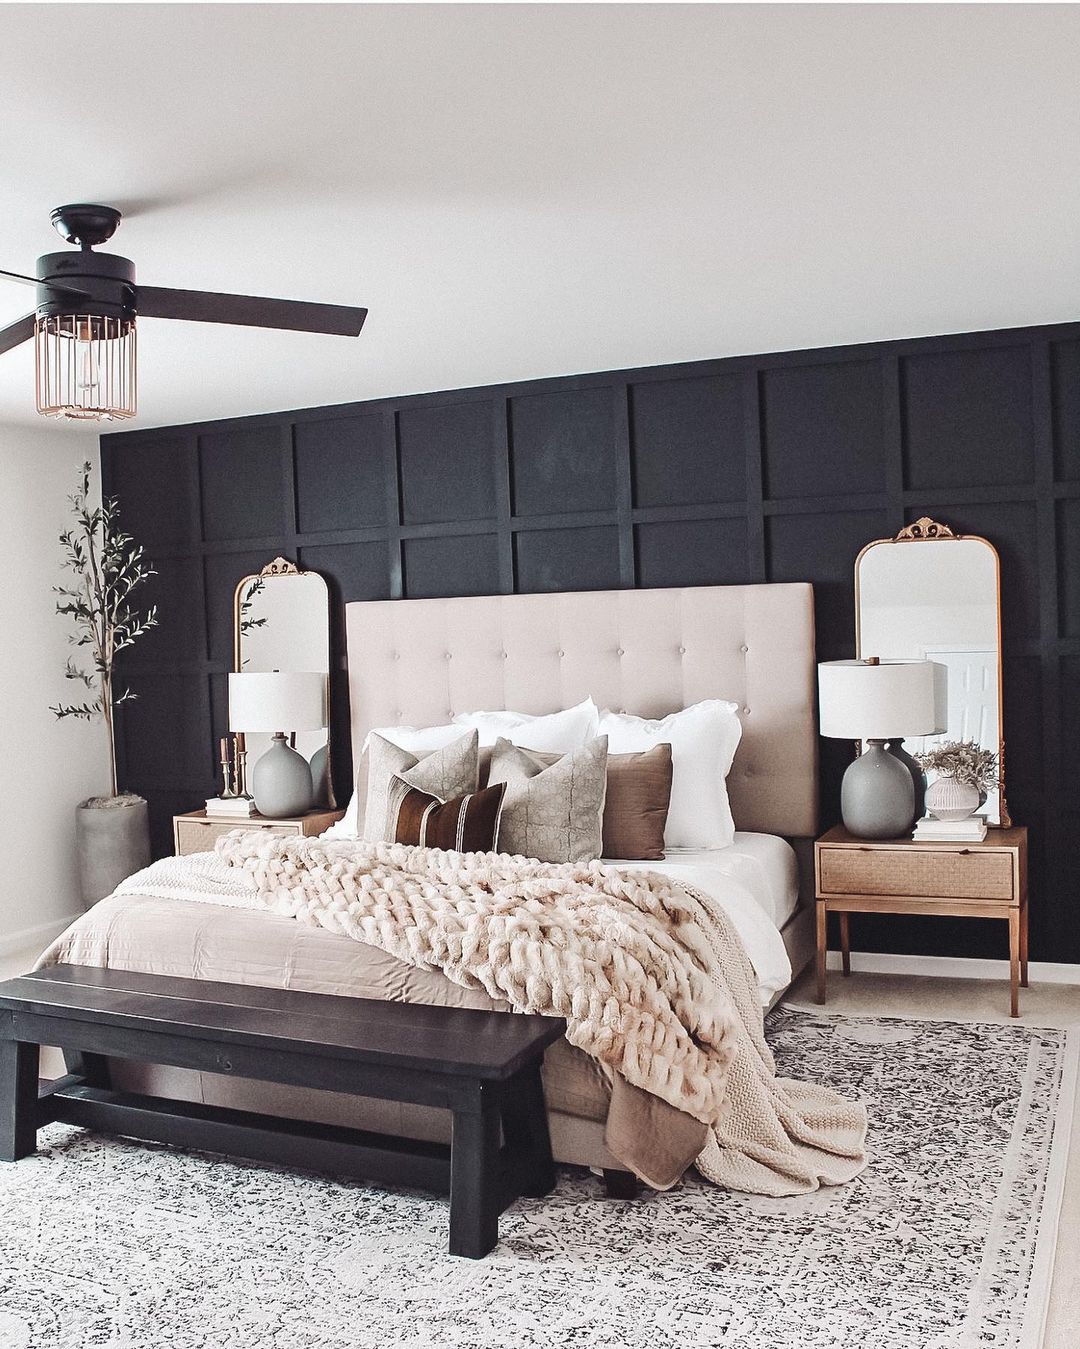 Transitional Style 101: Everything You Need to Know About This Popular Decor Trend